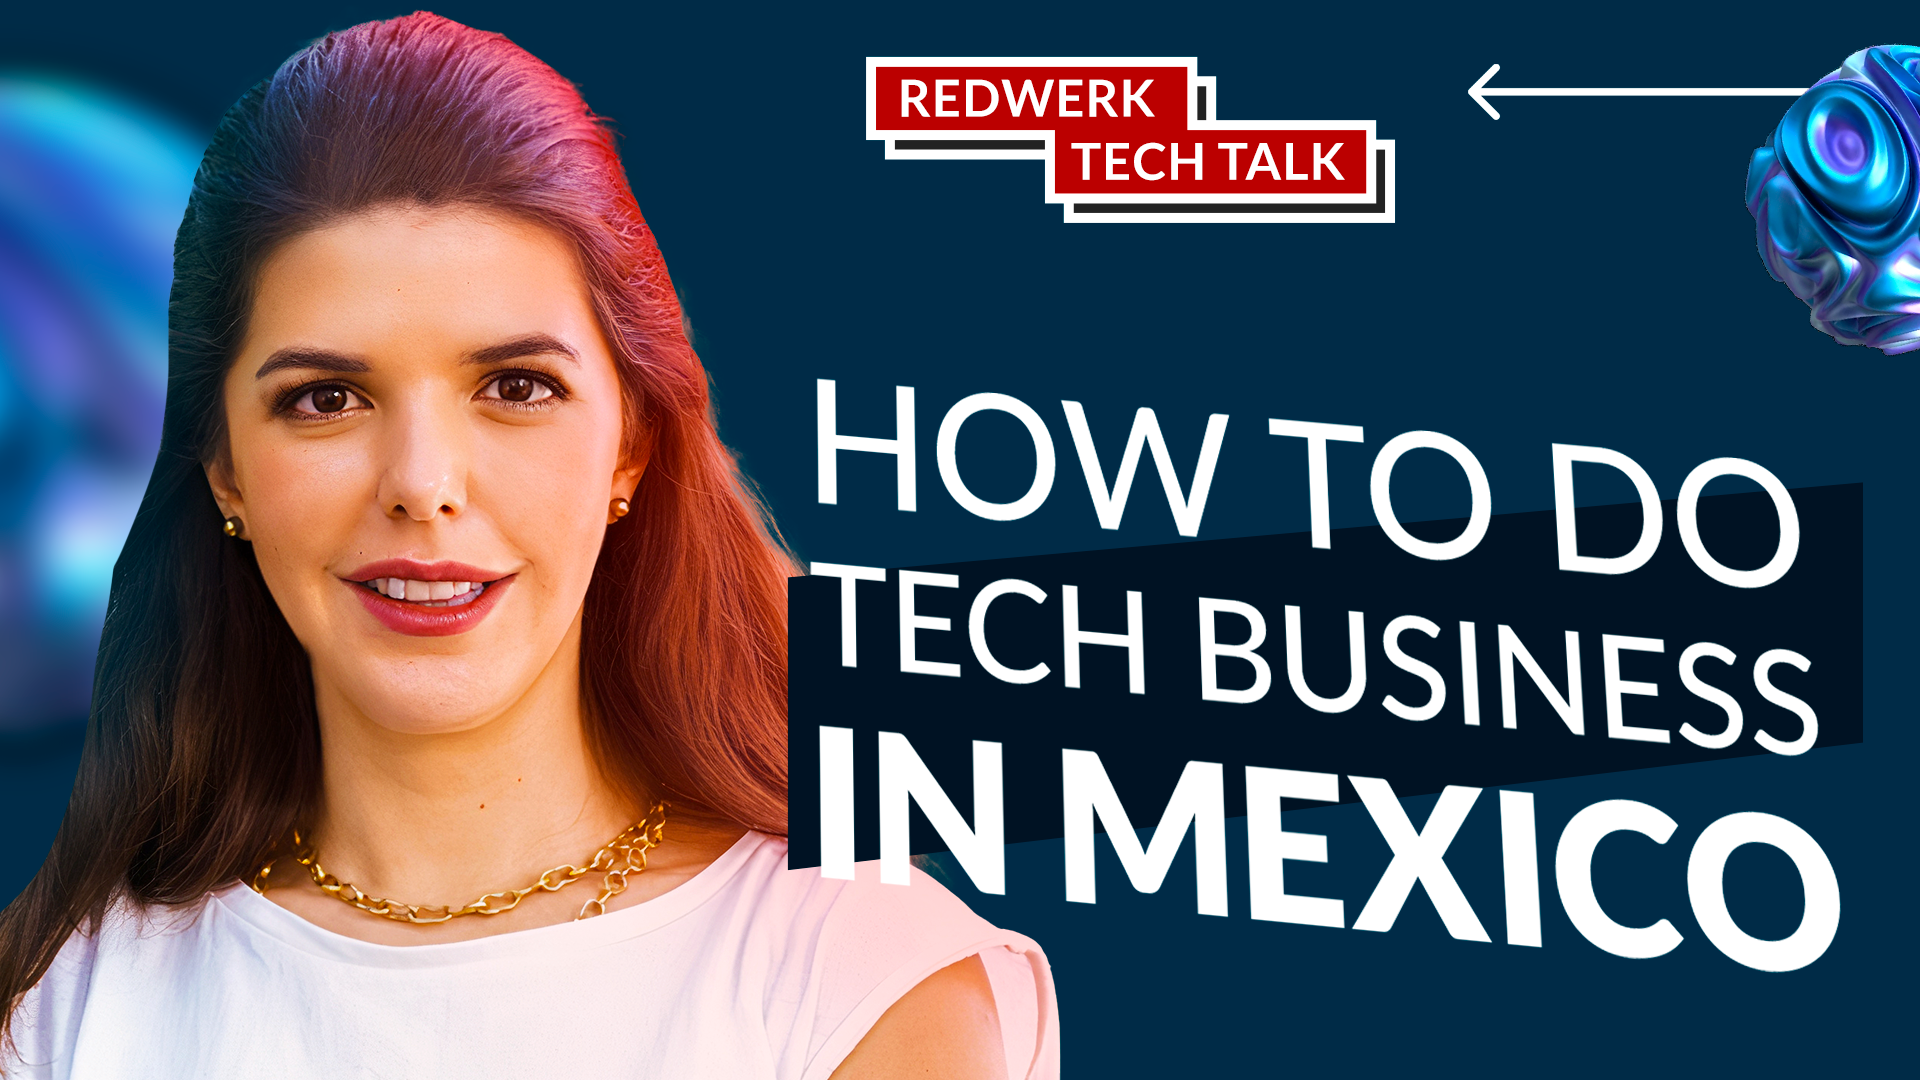 How do Software Development Companies Work in Mexico? TechTalk with Maria De Buen from BluePixel and Stadibox